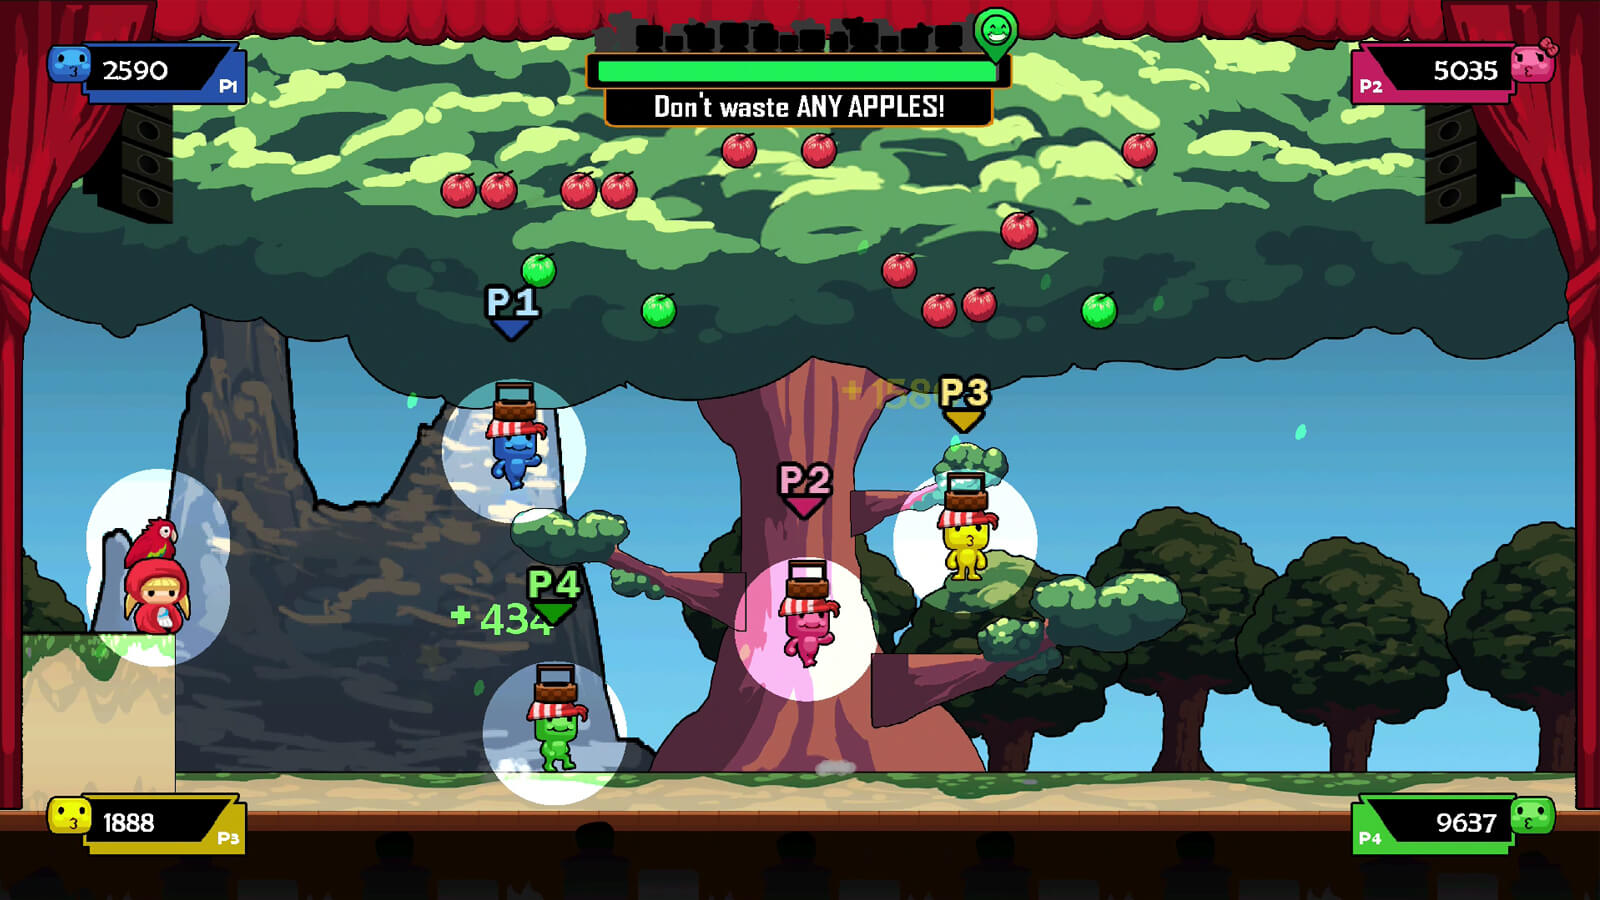 Four players of various colors jump around the stage under a large tree full of red and green apples